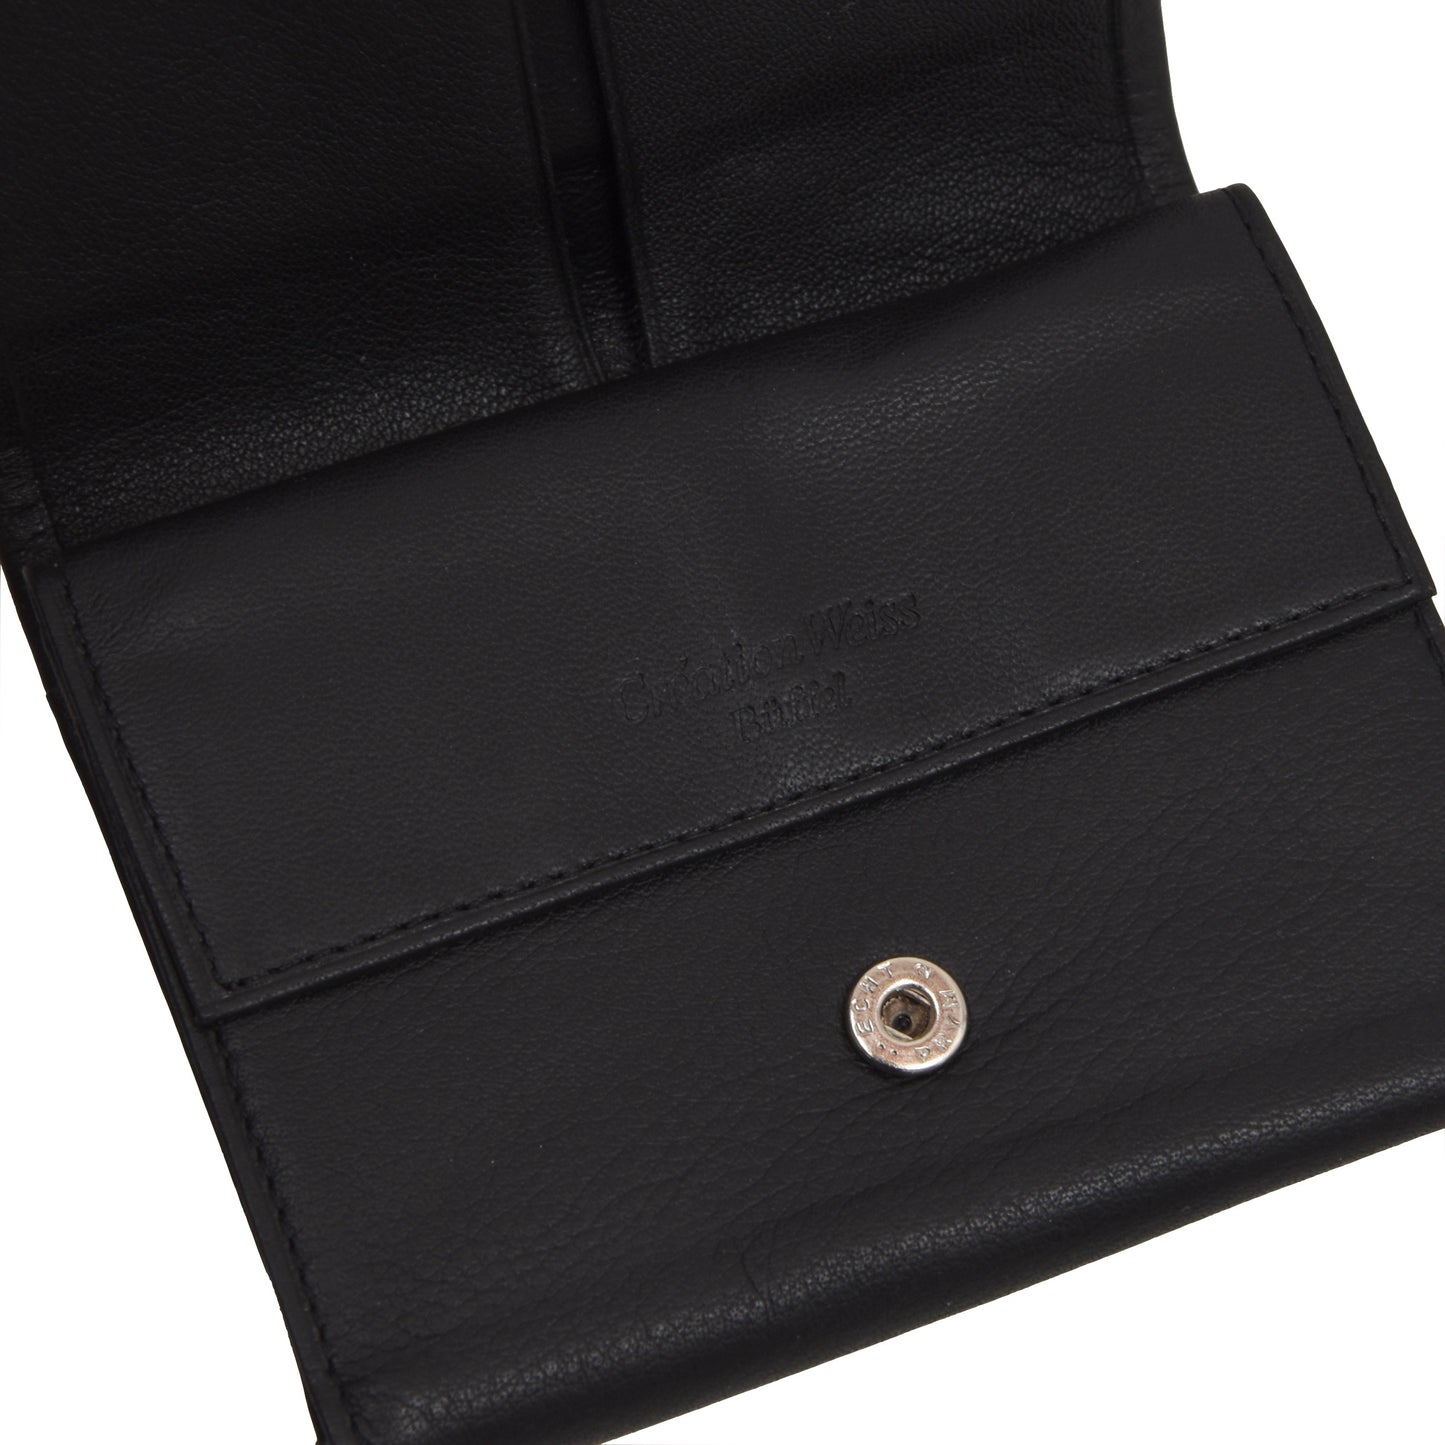 Creation Weiss Buffalo Leather Wallet - Black